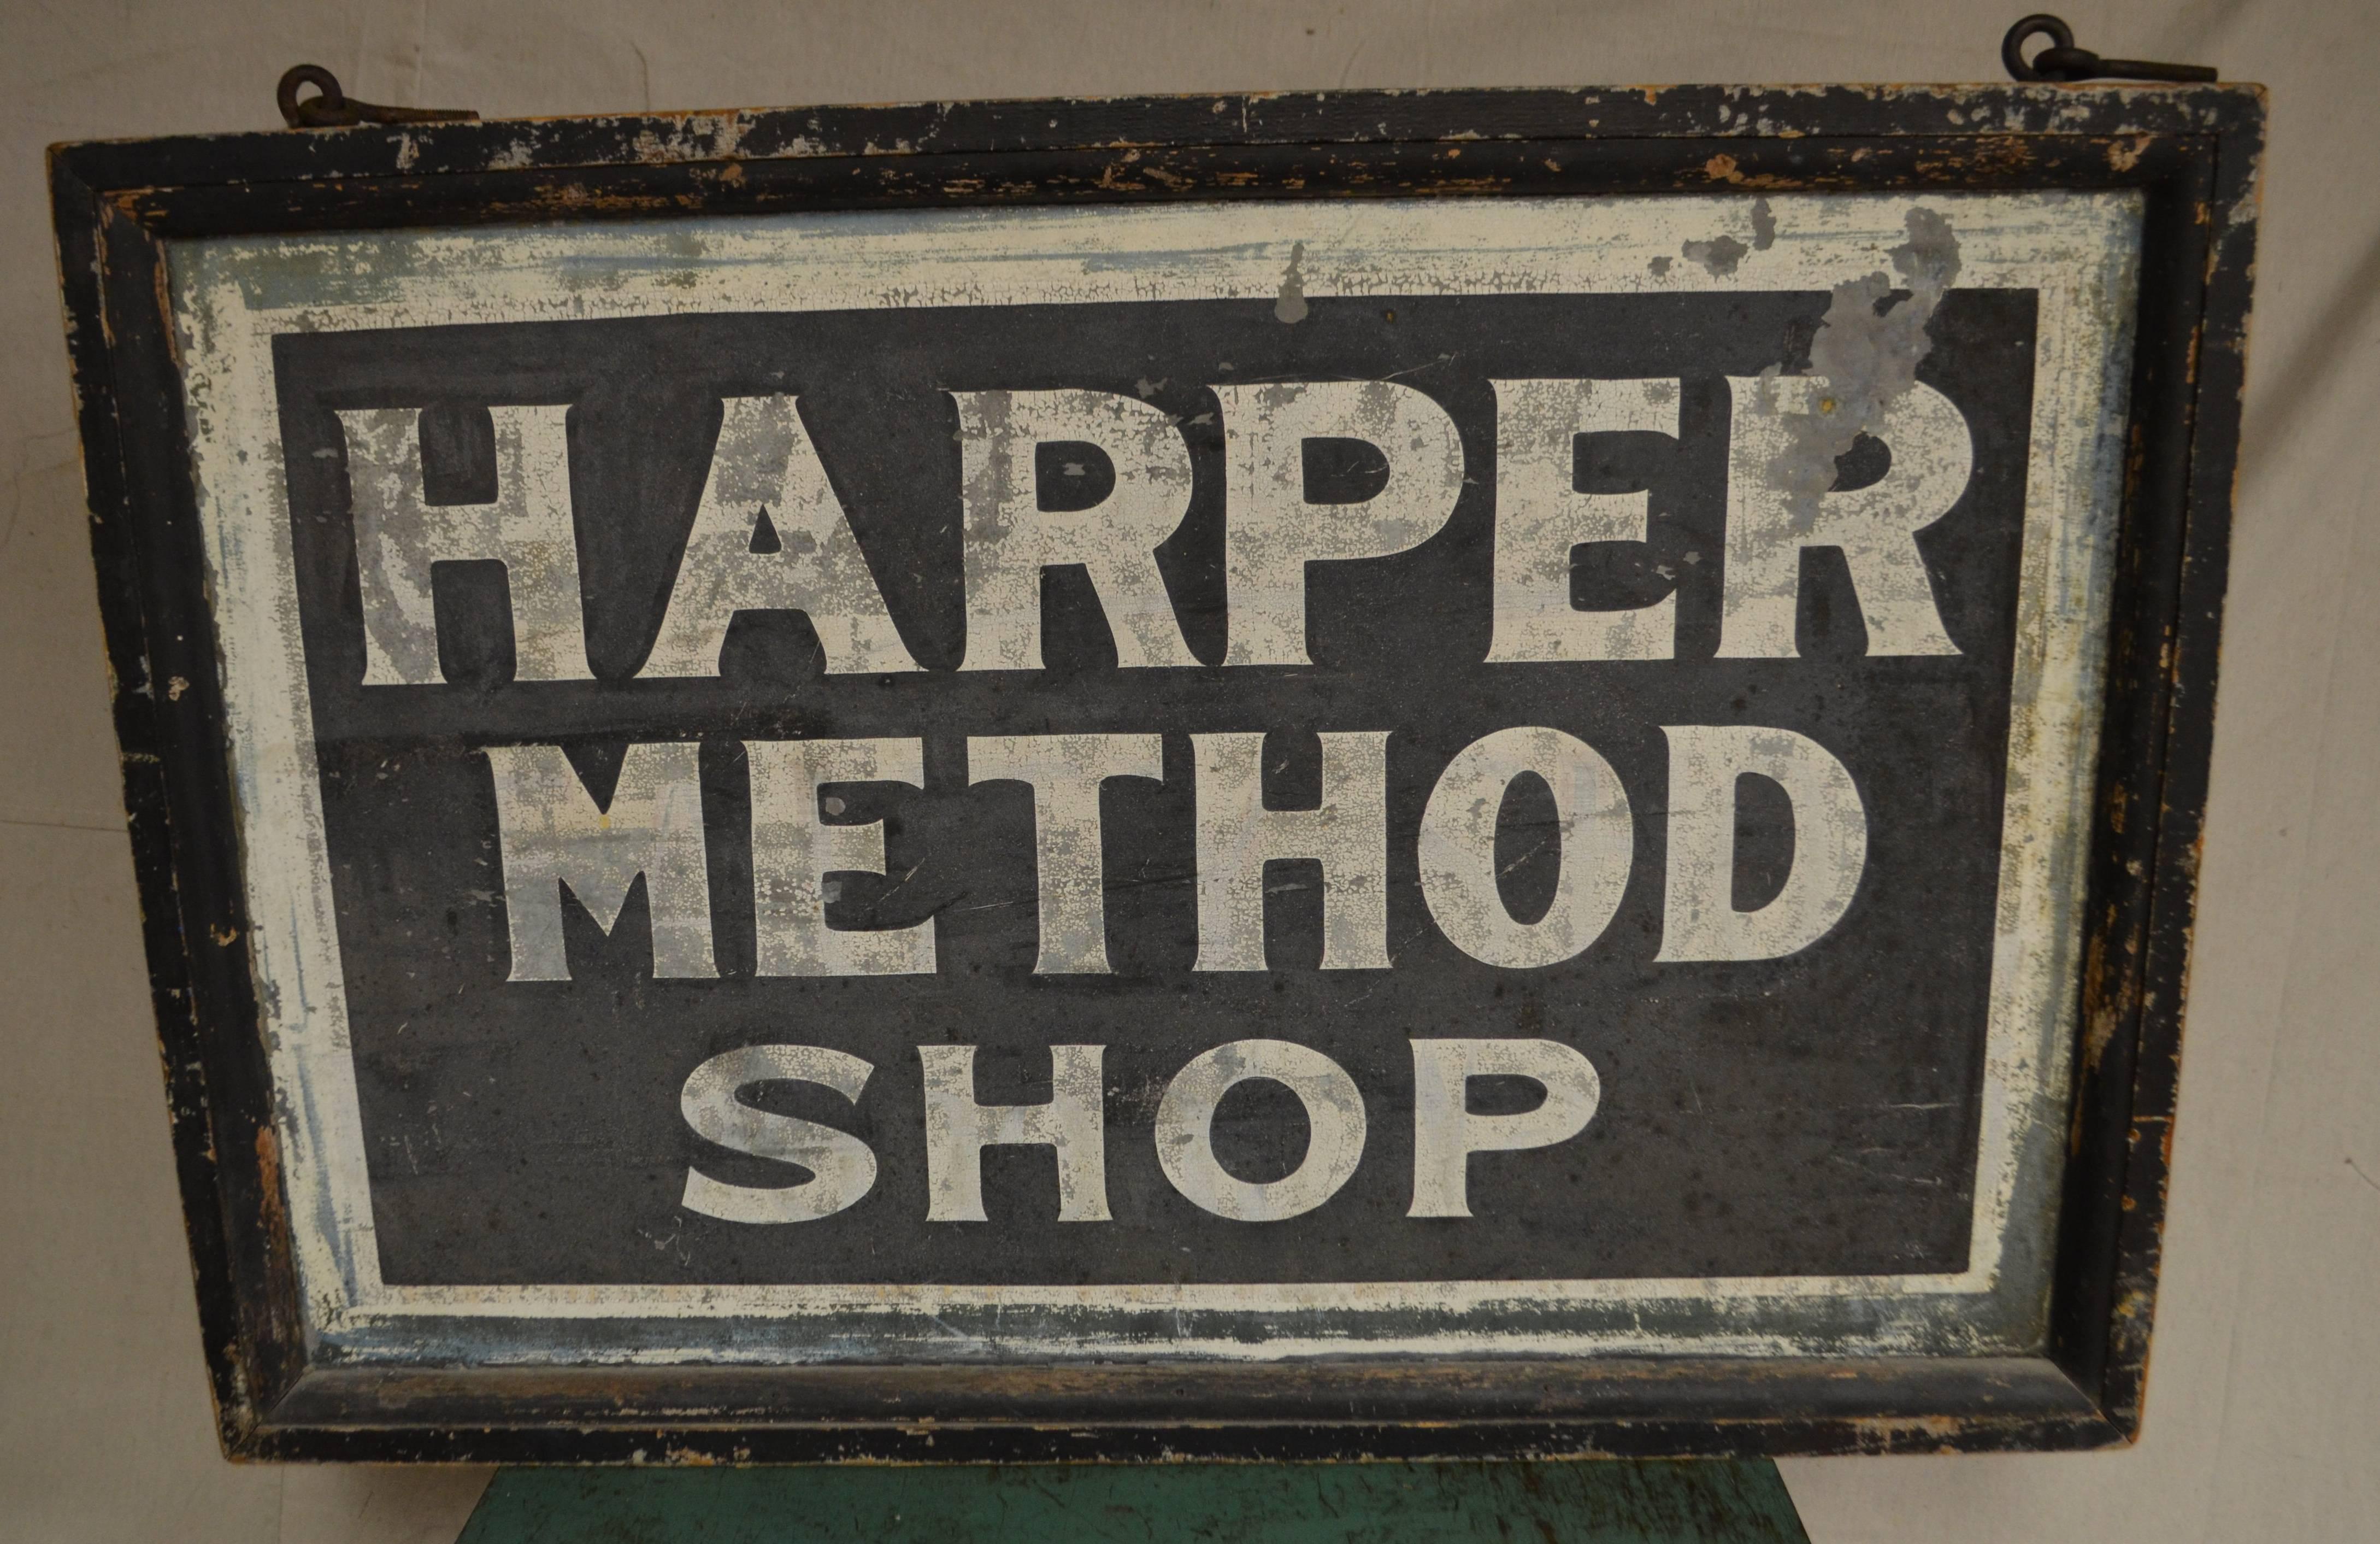 Rare two-sided sign for a shop created by Martha Matilda Harper. Framed in wood with worn black paint. The signage is paint on metal with white lettering against black and traces of blue coming through.

There's a fascinating back story